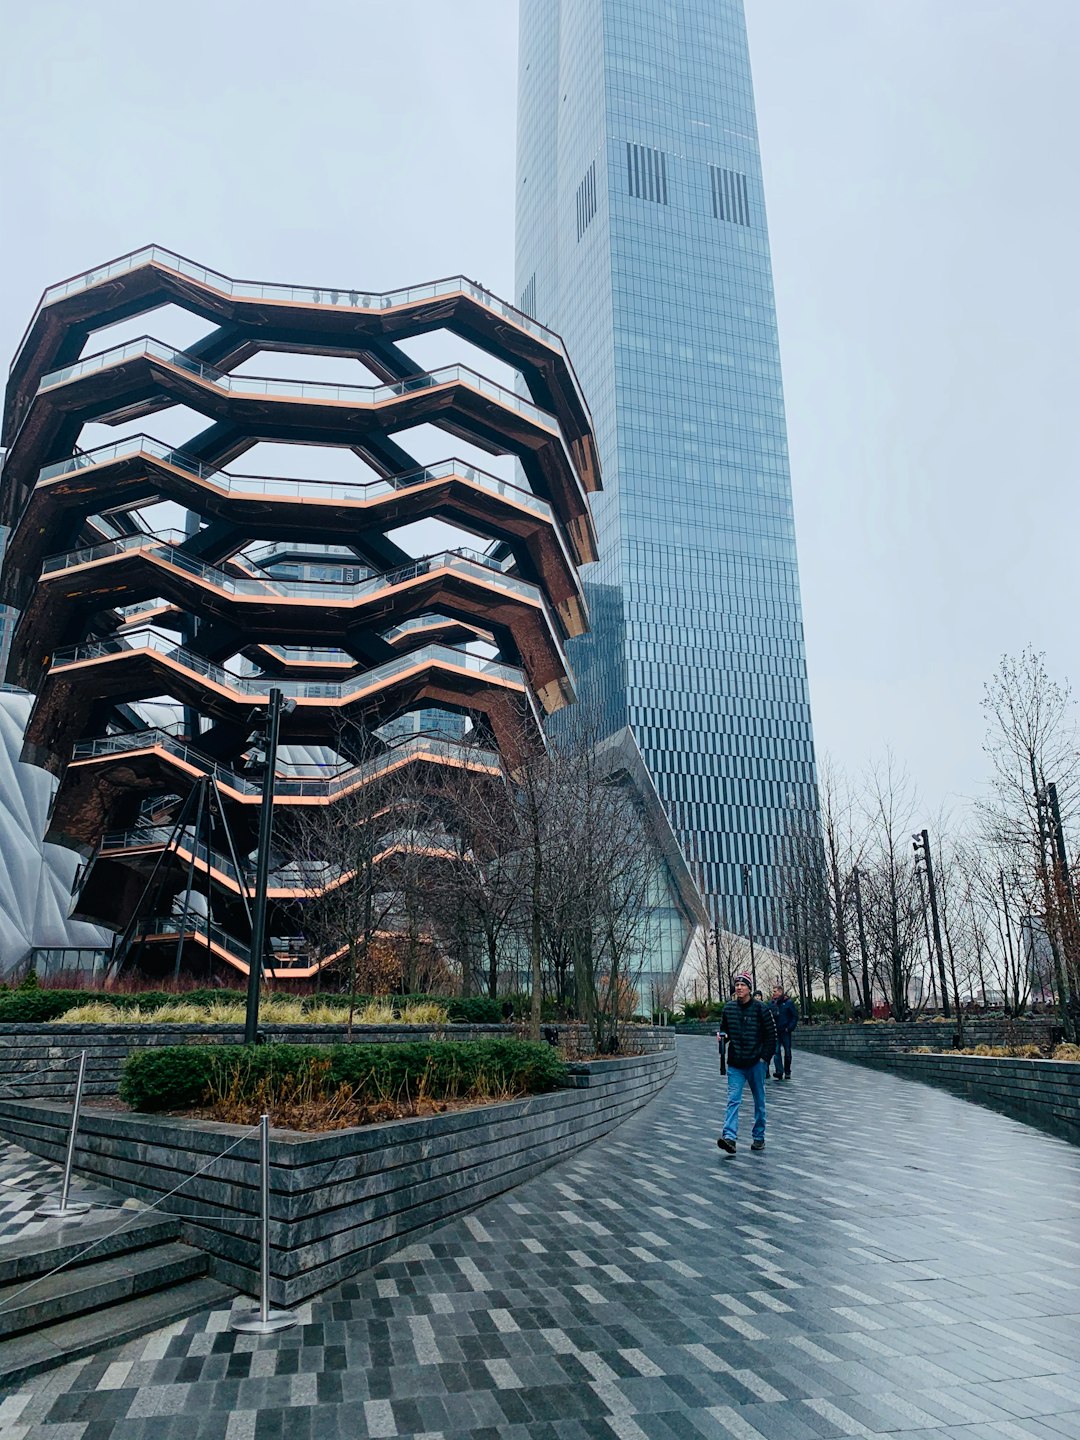 Travel Tips and Stories of Hudson Yards in United States